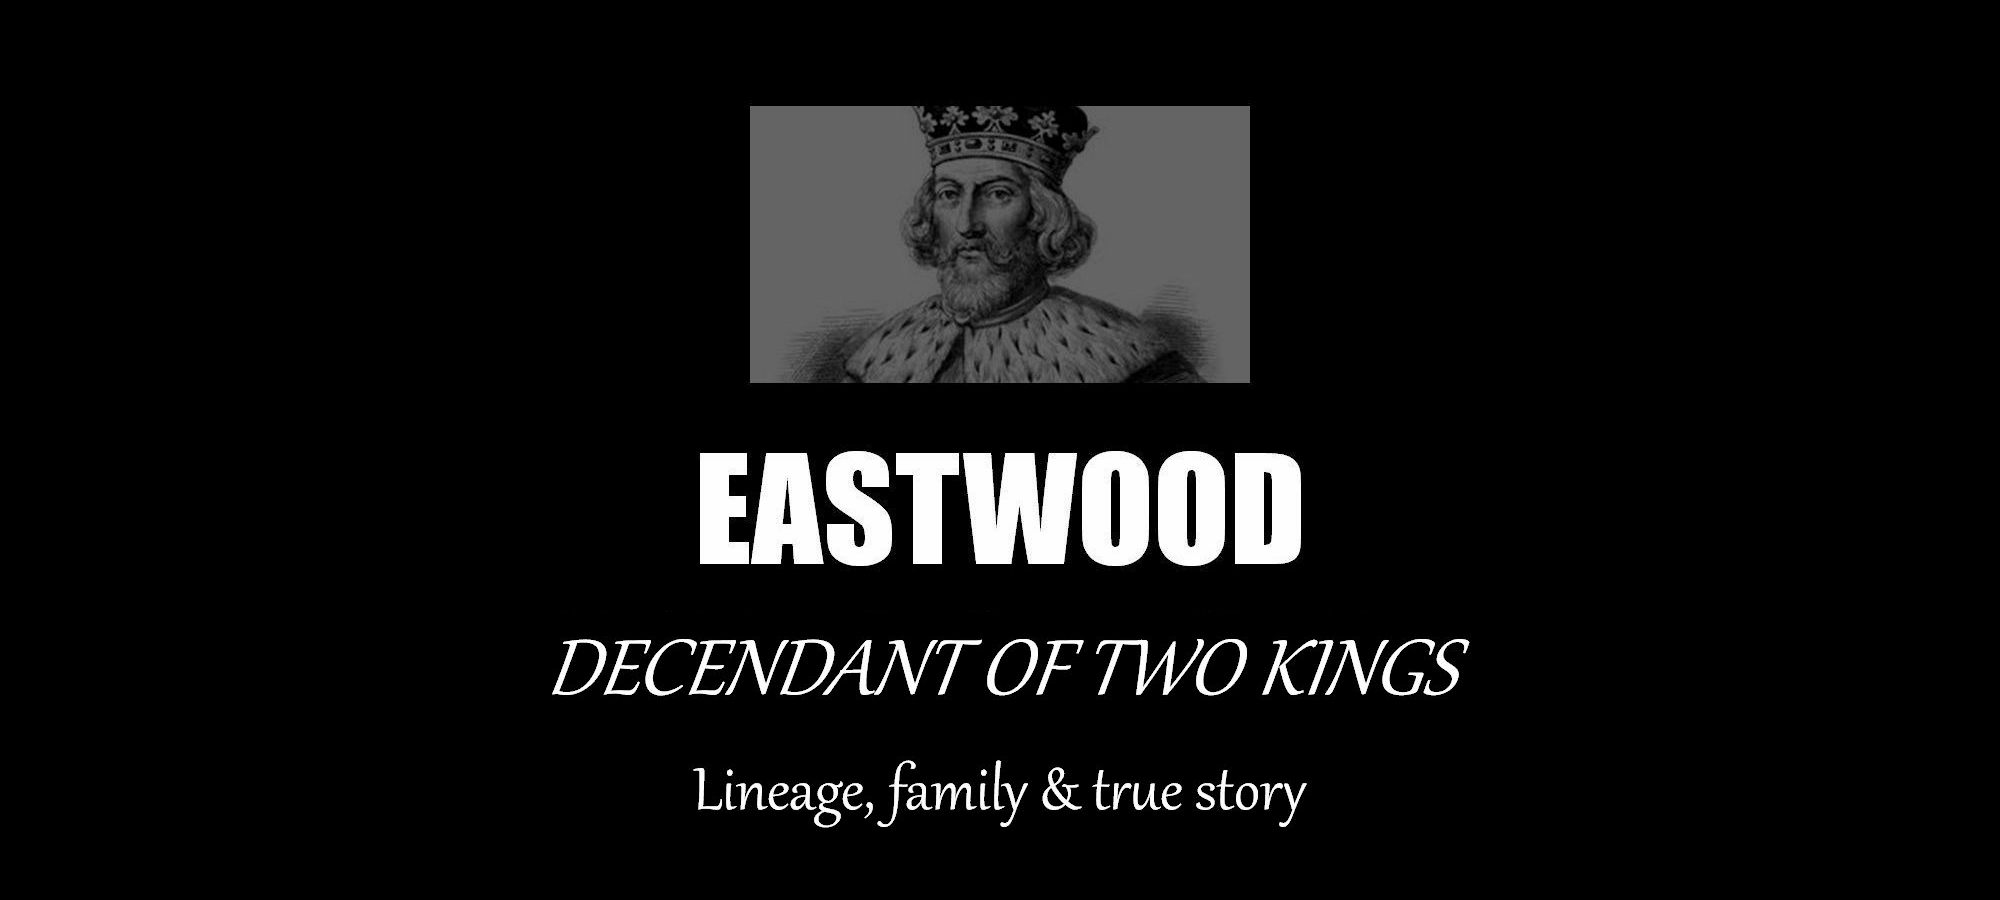 william-eastwood-is-an-american-author-who-provides-free-international-philosophy-lineage-family